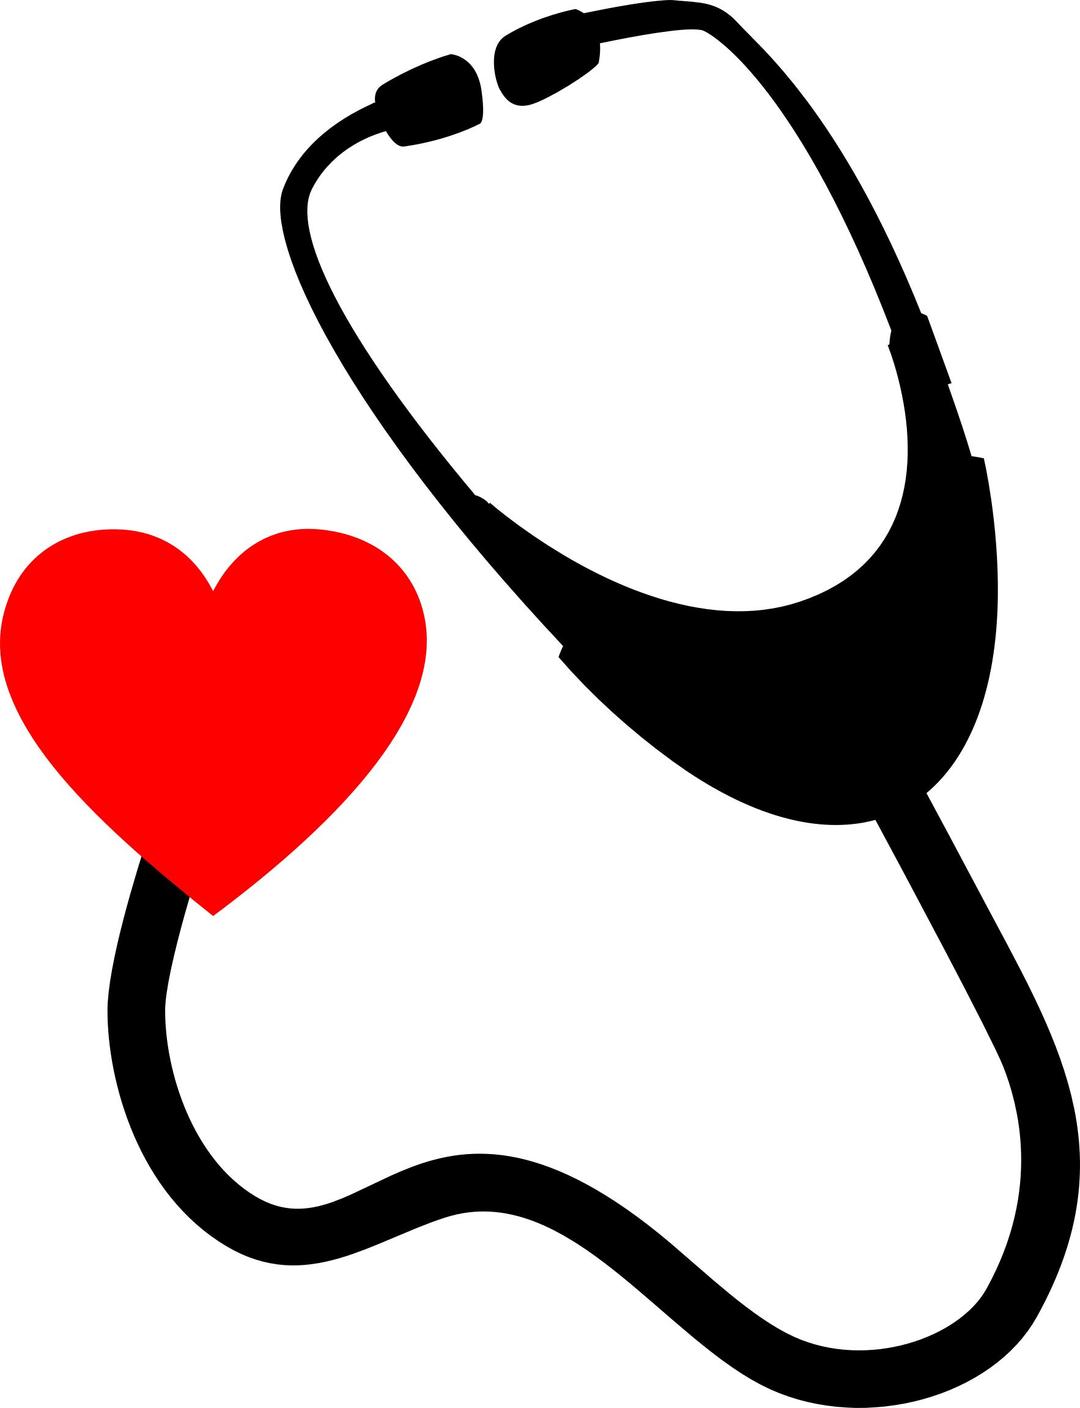 Heart Stethoscope 2 png transparent